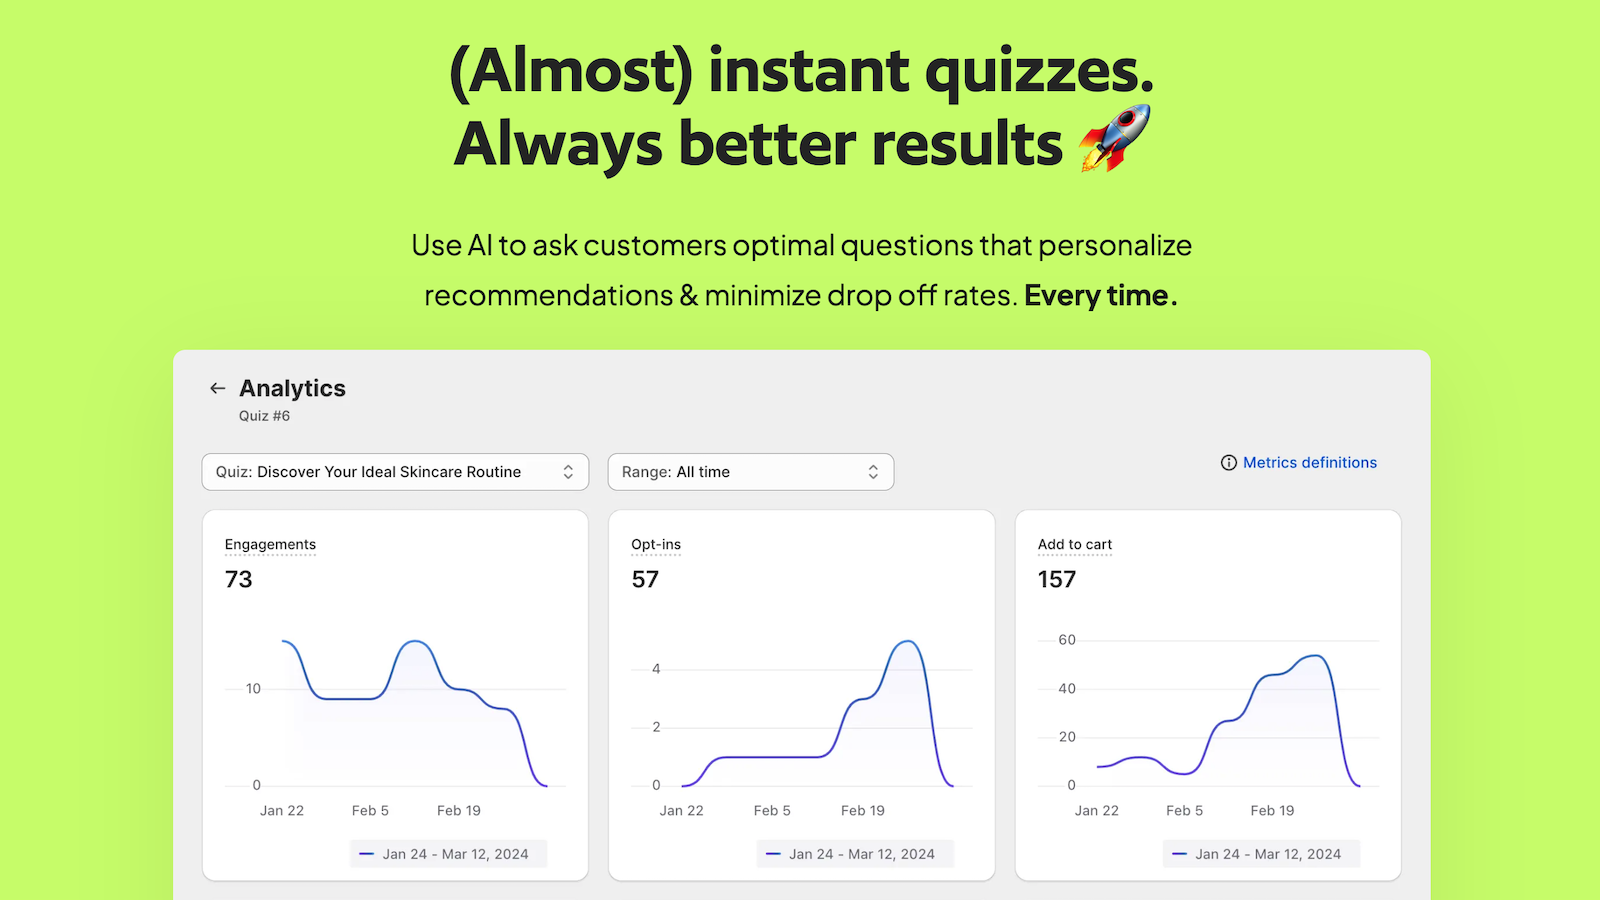 AI-powered quizzes increase conversions and average order value.